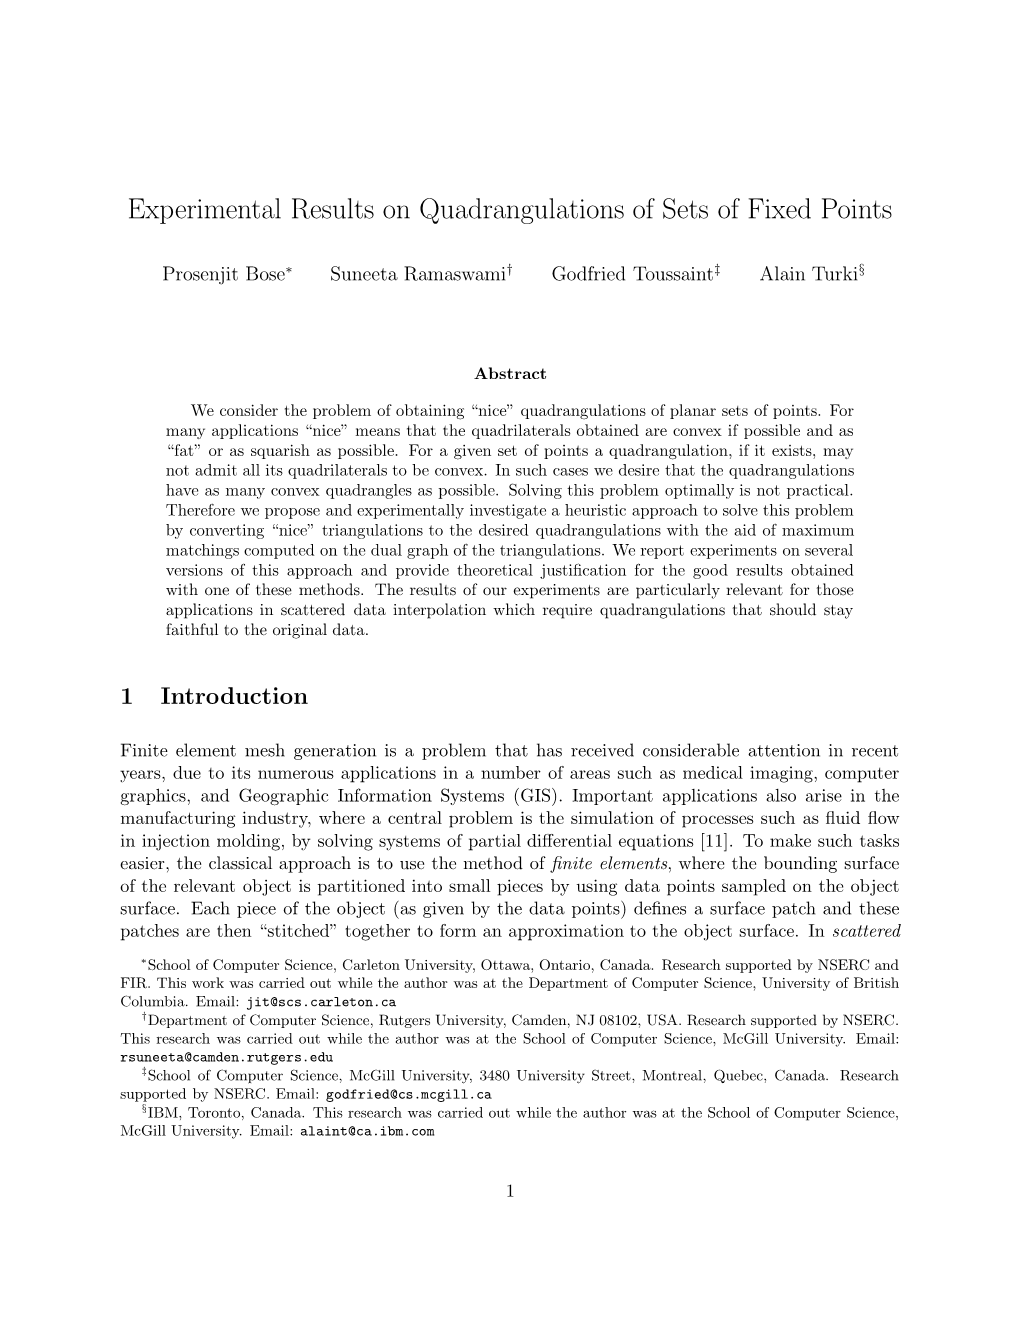 Experimental Results on Quadrangulations of Sets of Fixed Points